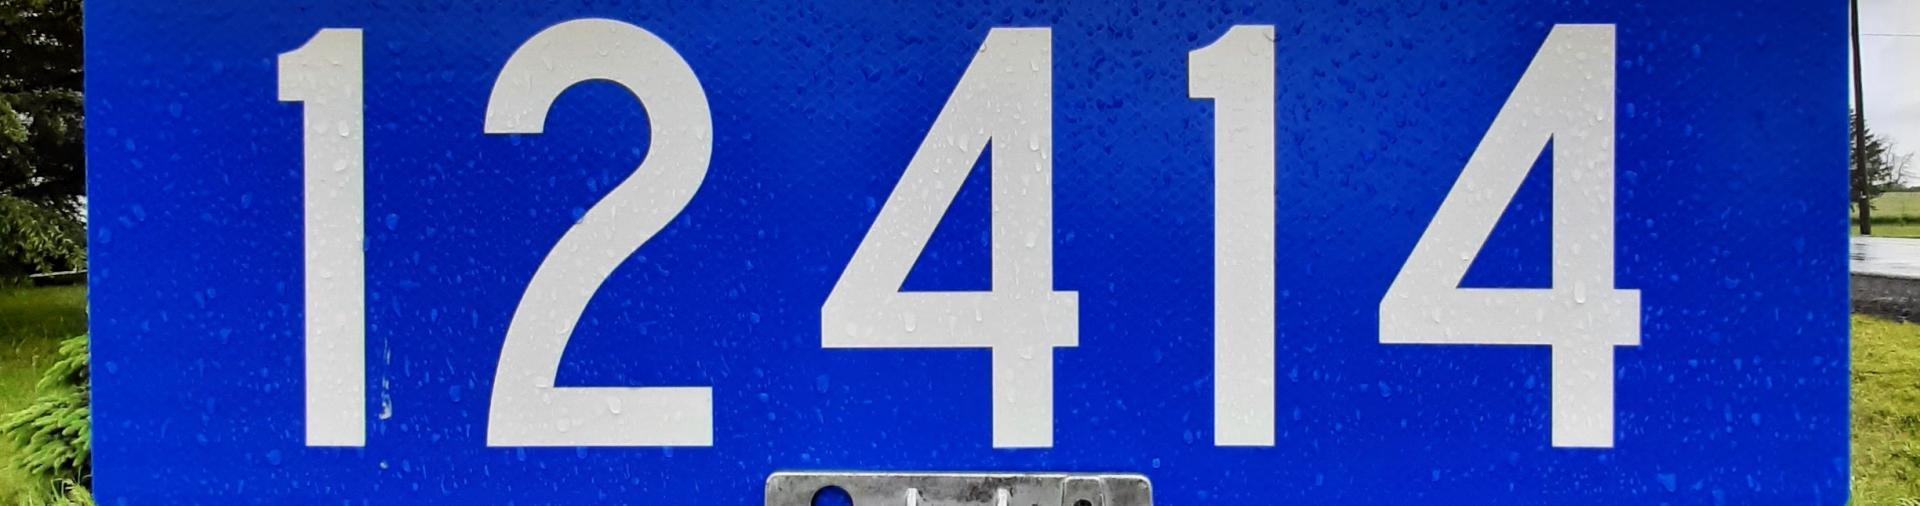 Civic Number sign